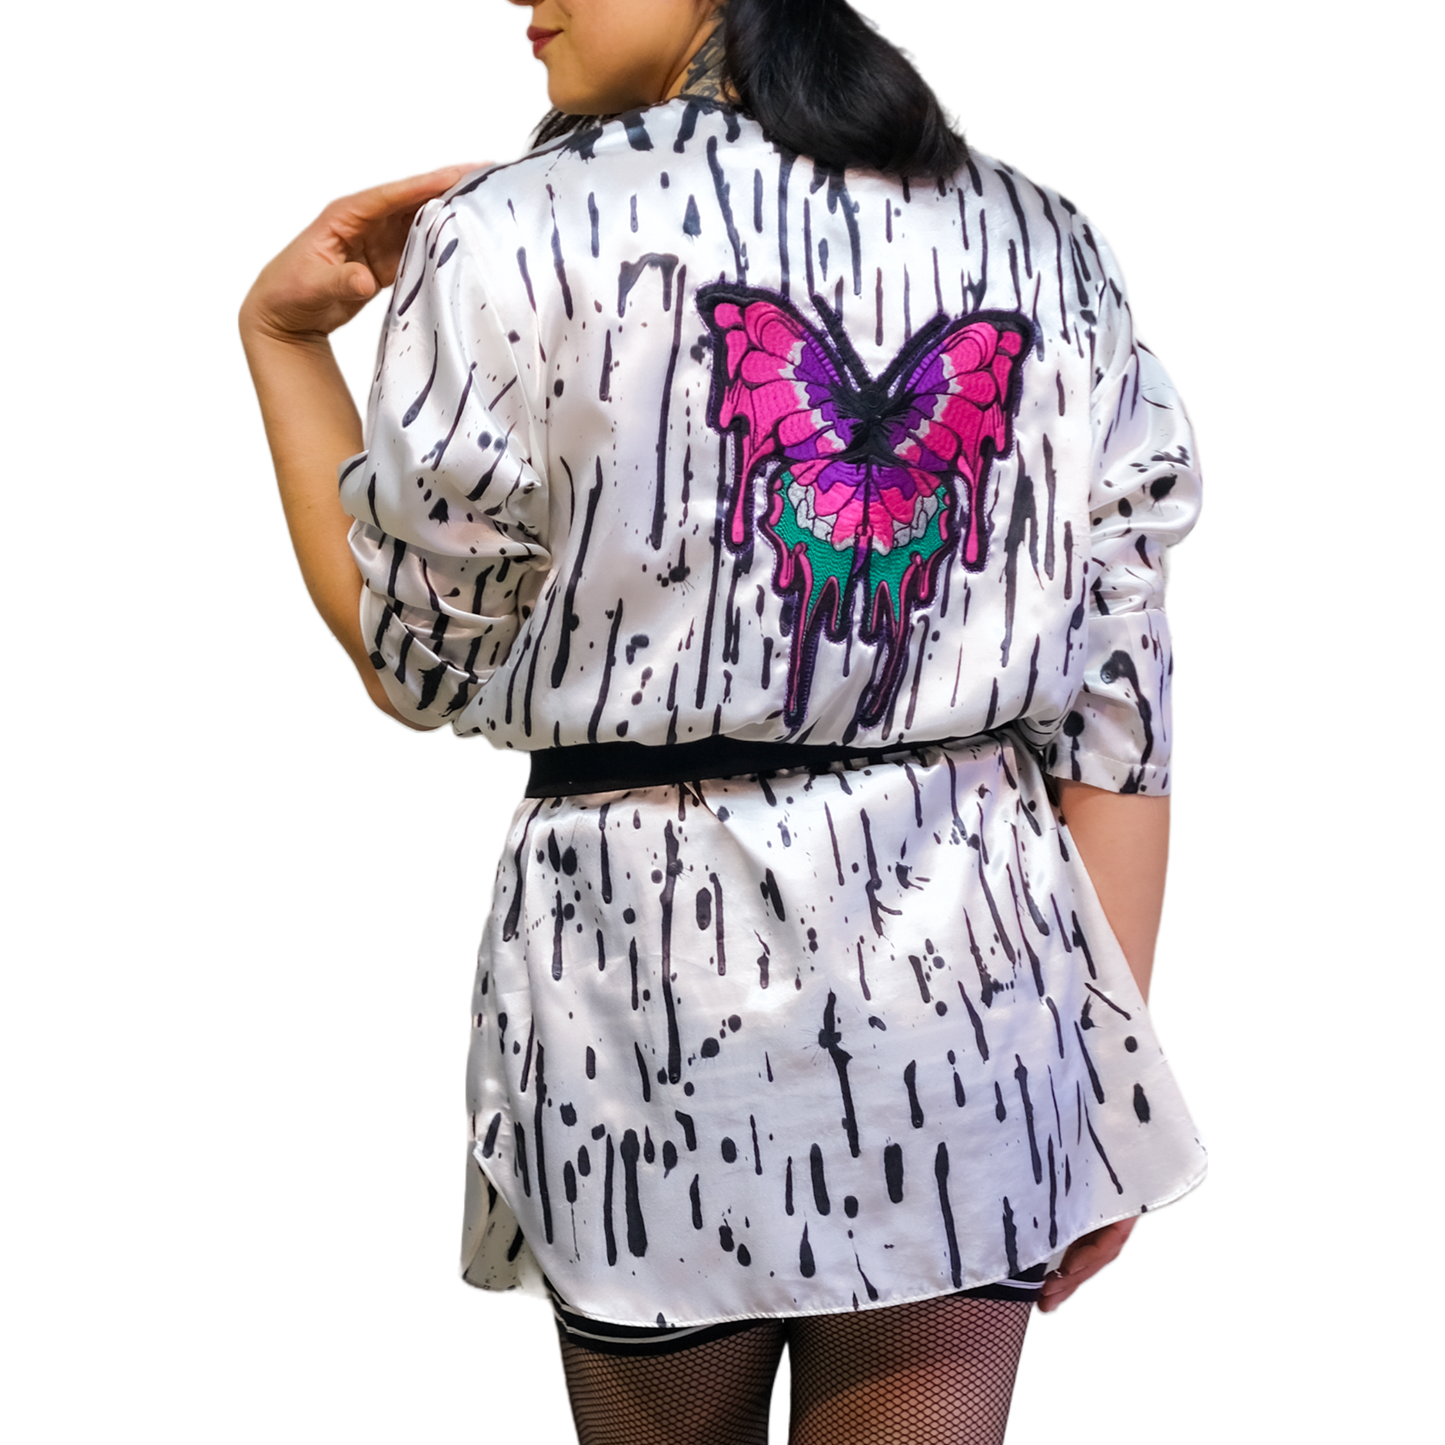 Vintage Butterfly Up-cycled Shirt Dress and Belt Hand-painted by Skye De La Rosa